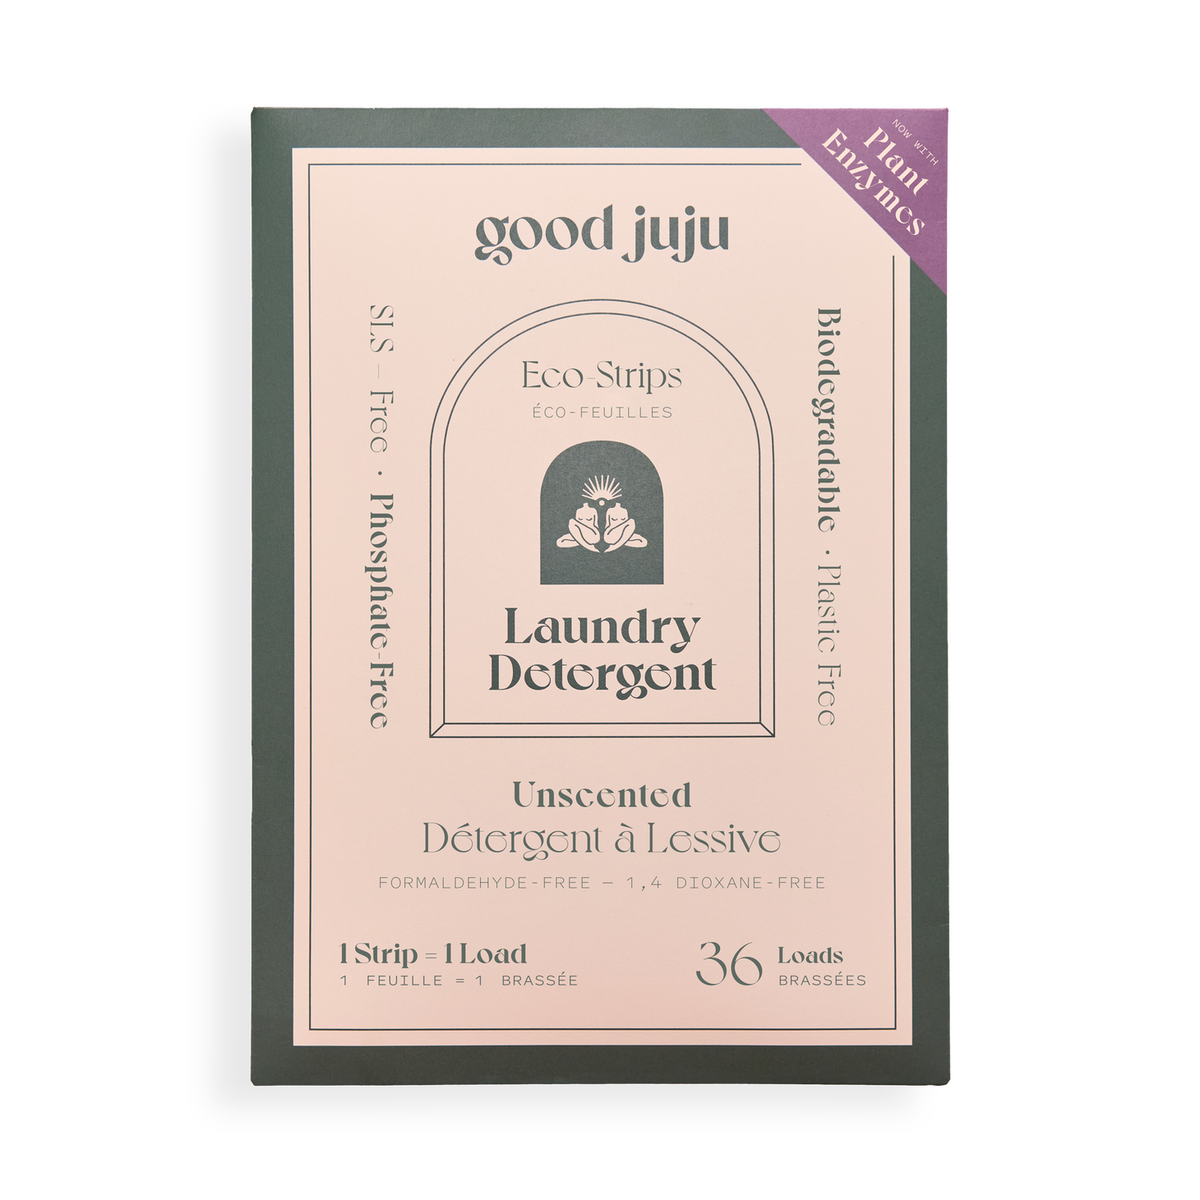 Good Juju Laundry Detergent Eco-Strips Unscented - 36 Loads